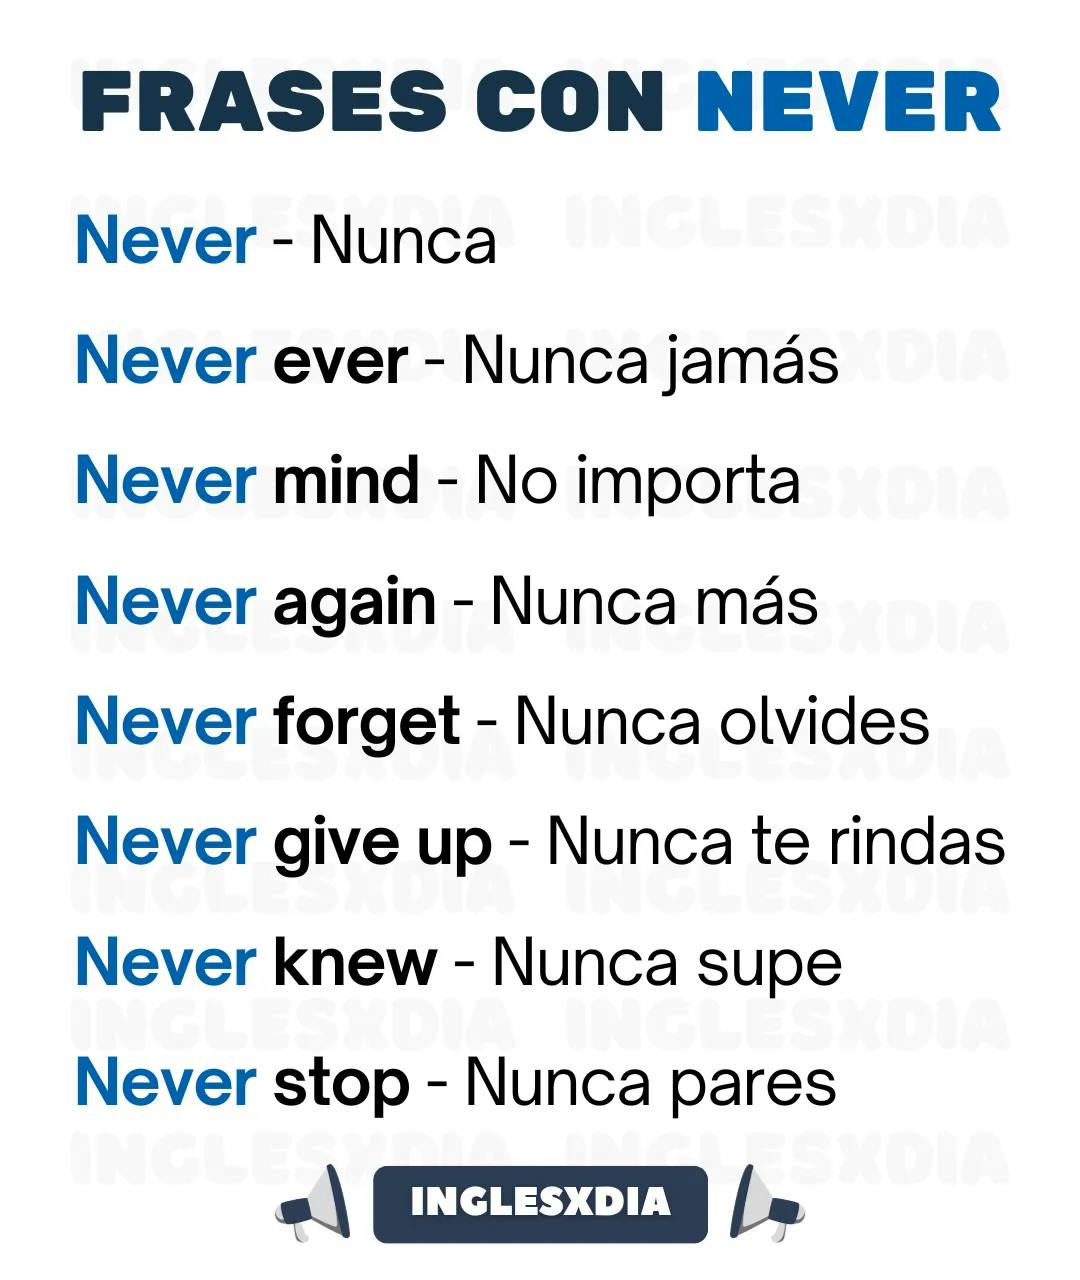 Frases con Never